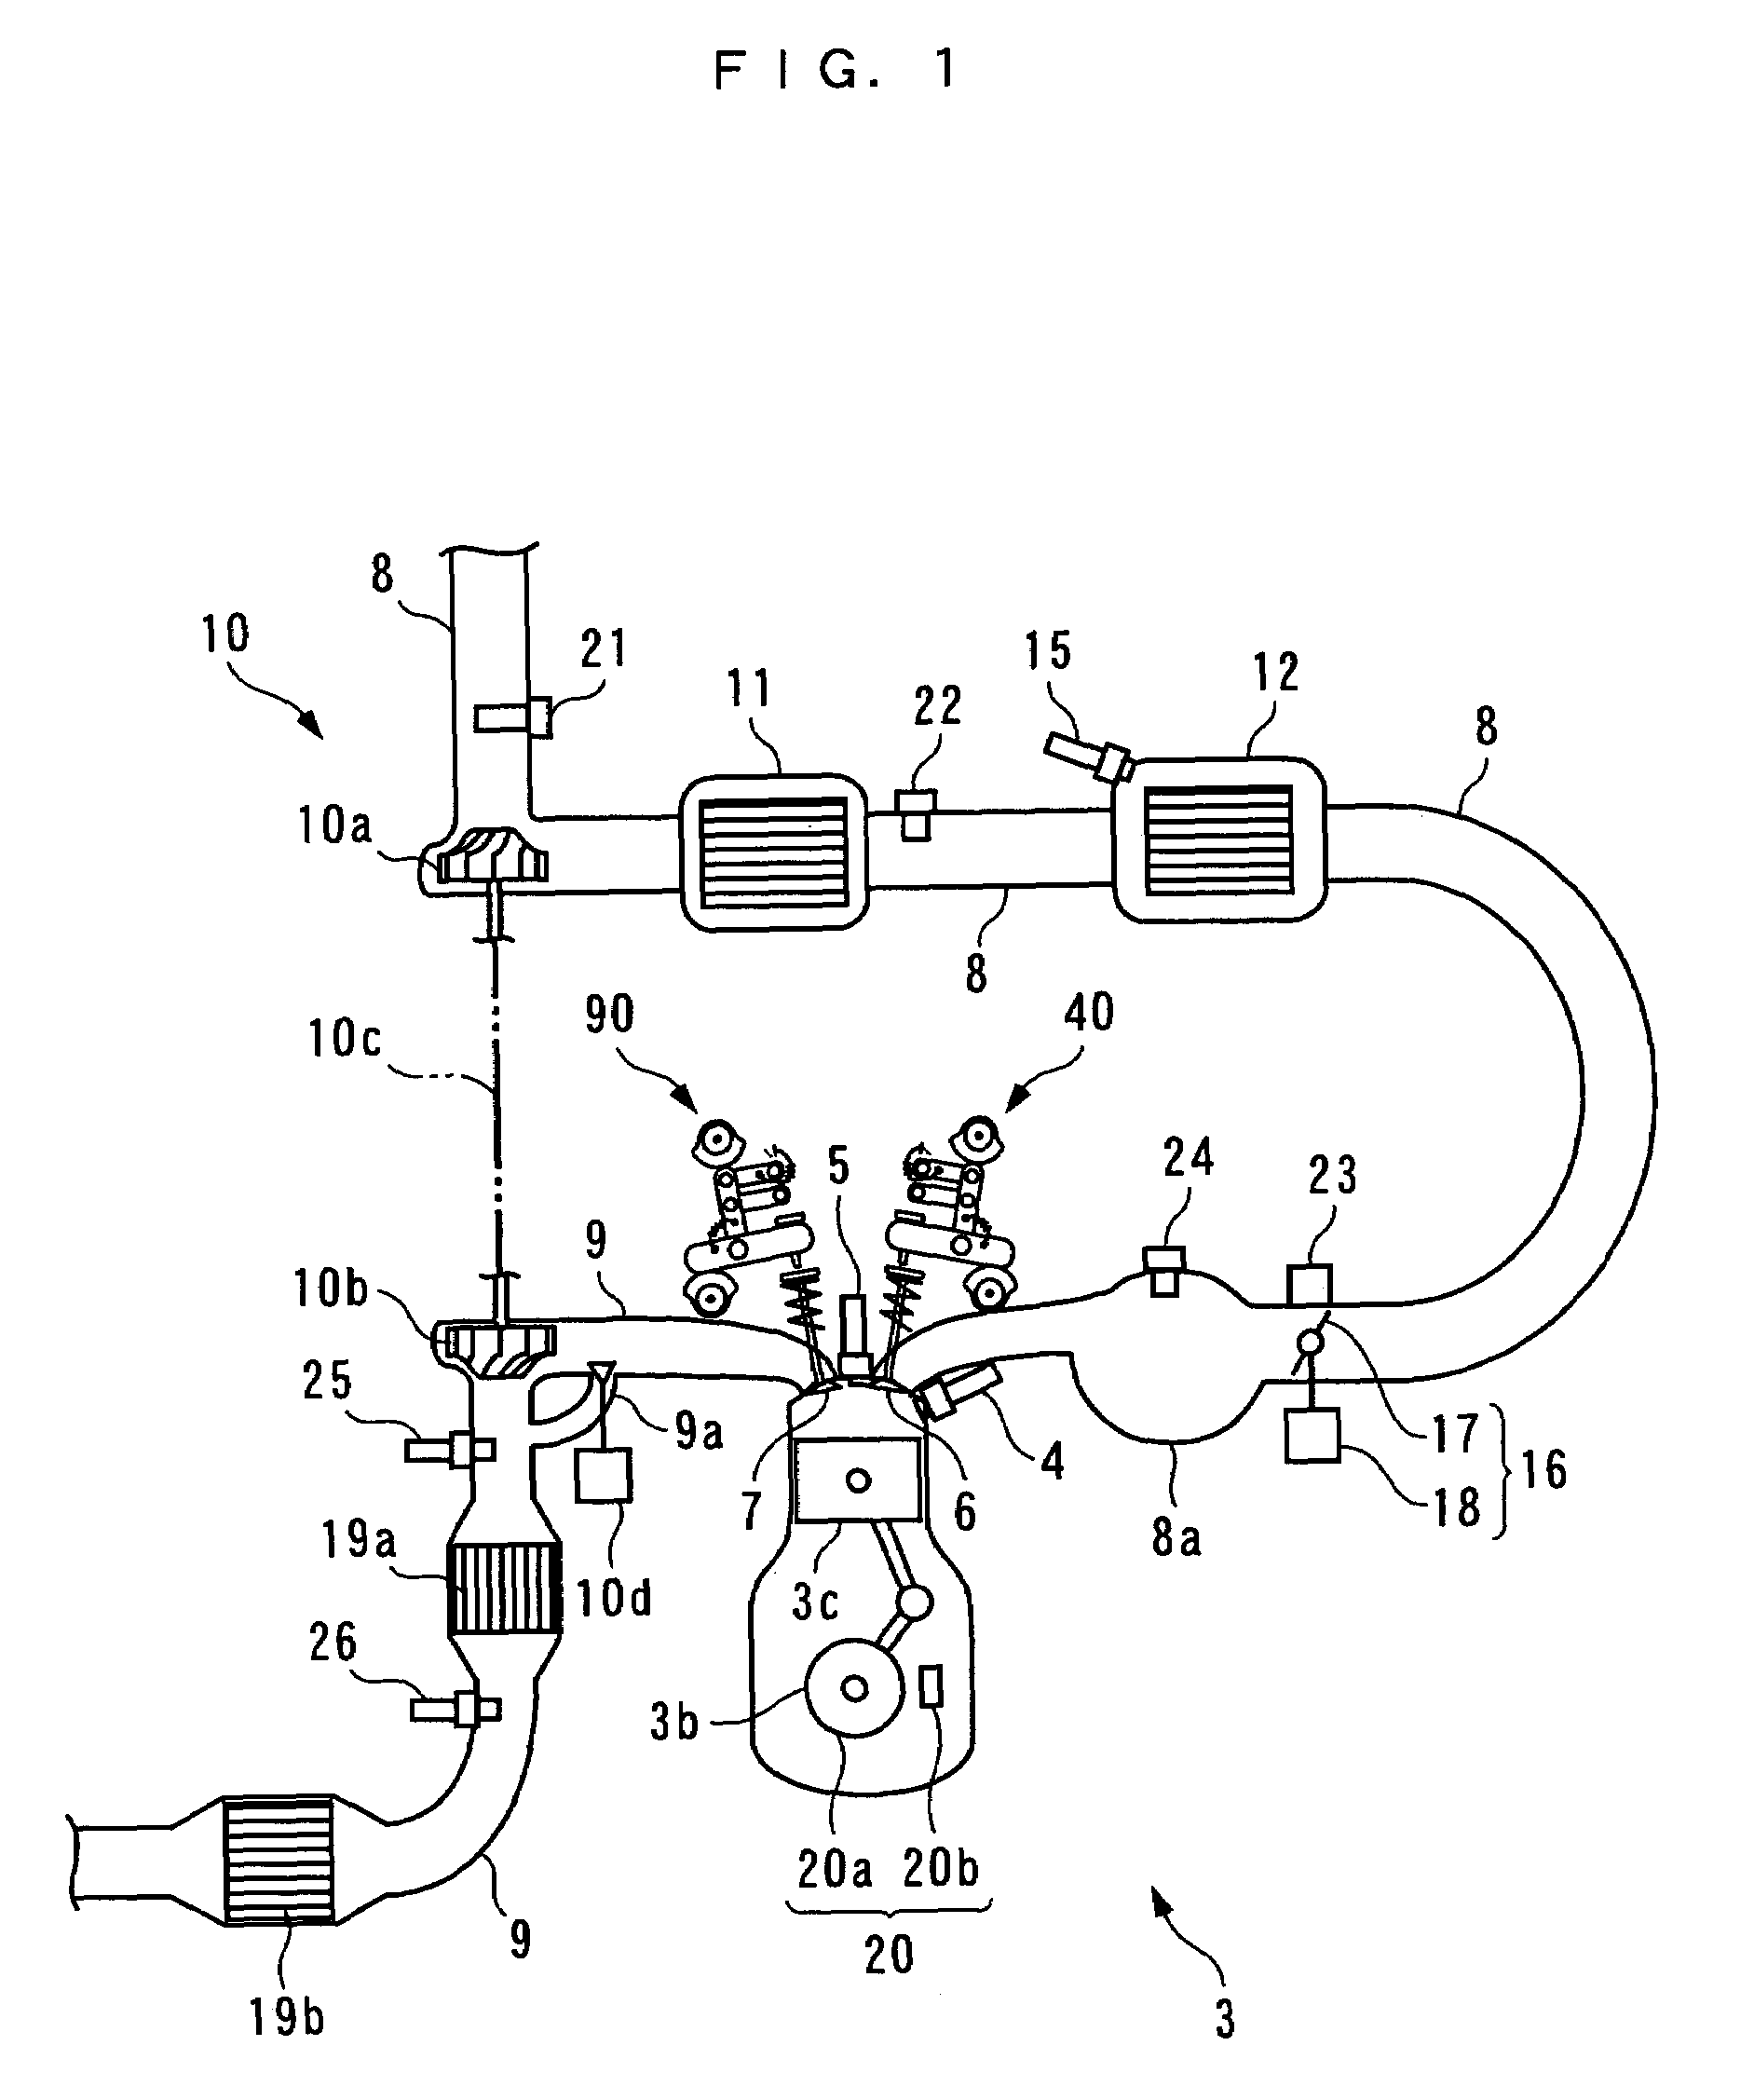 Valve timing control system and control system for an internal combustion engine